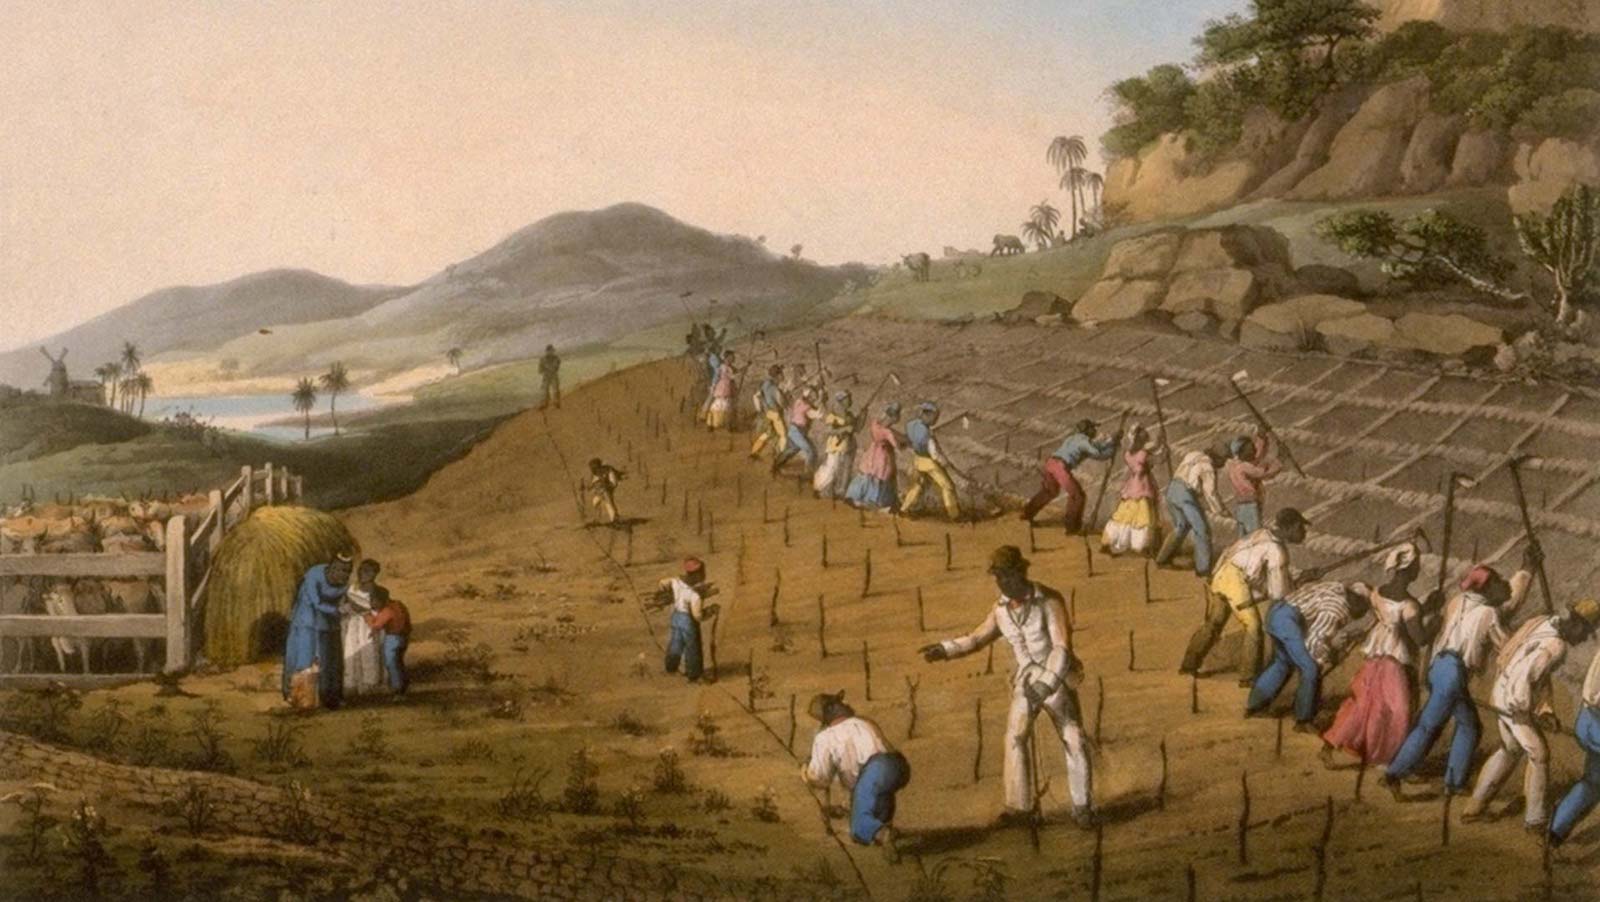 Digging Holes for Planting Sugar Cane, Antigua, West Indies, 1823